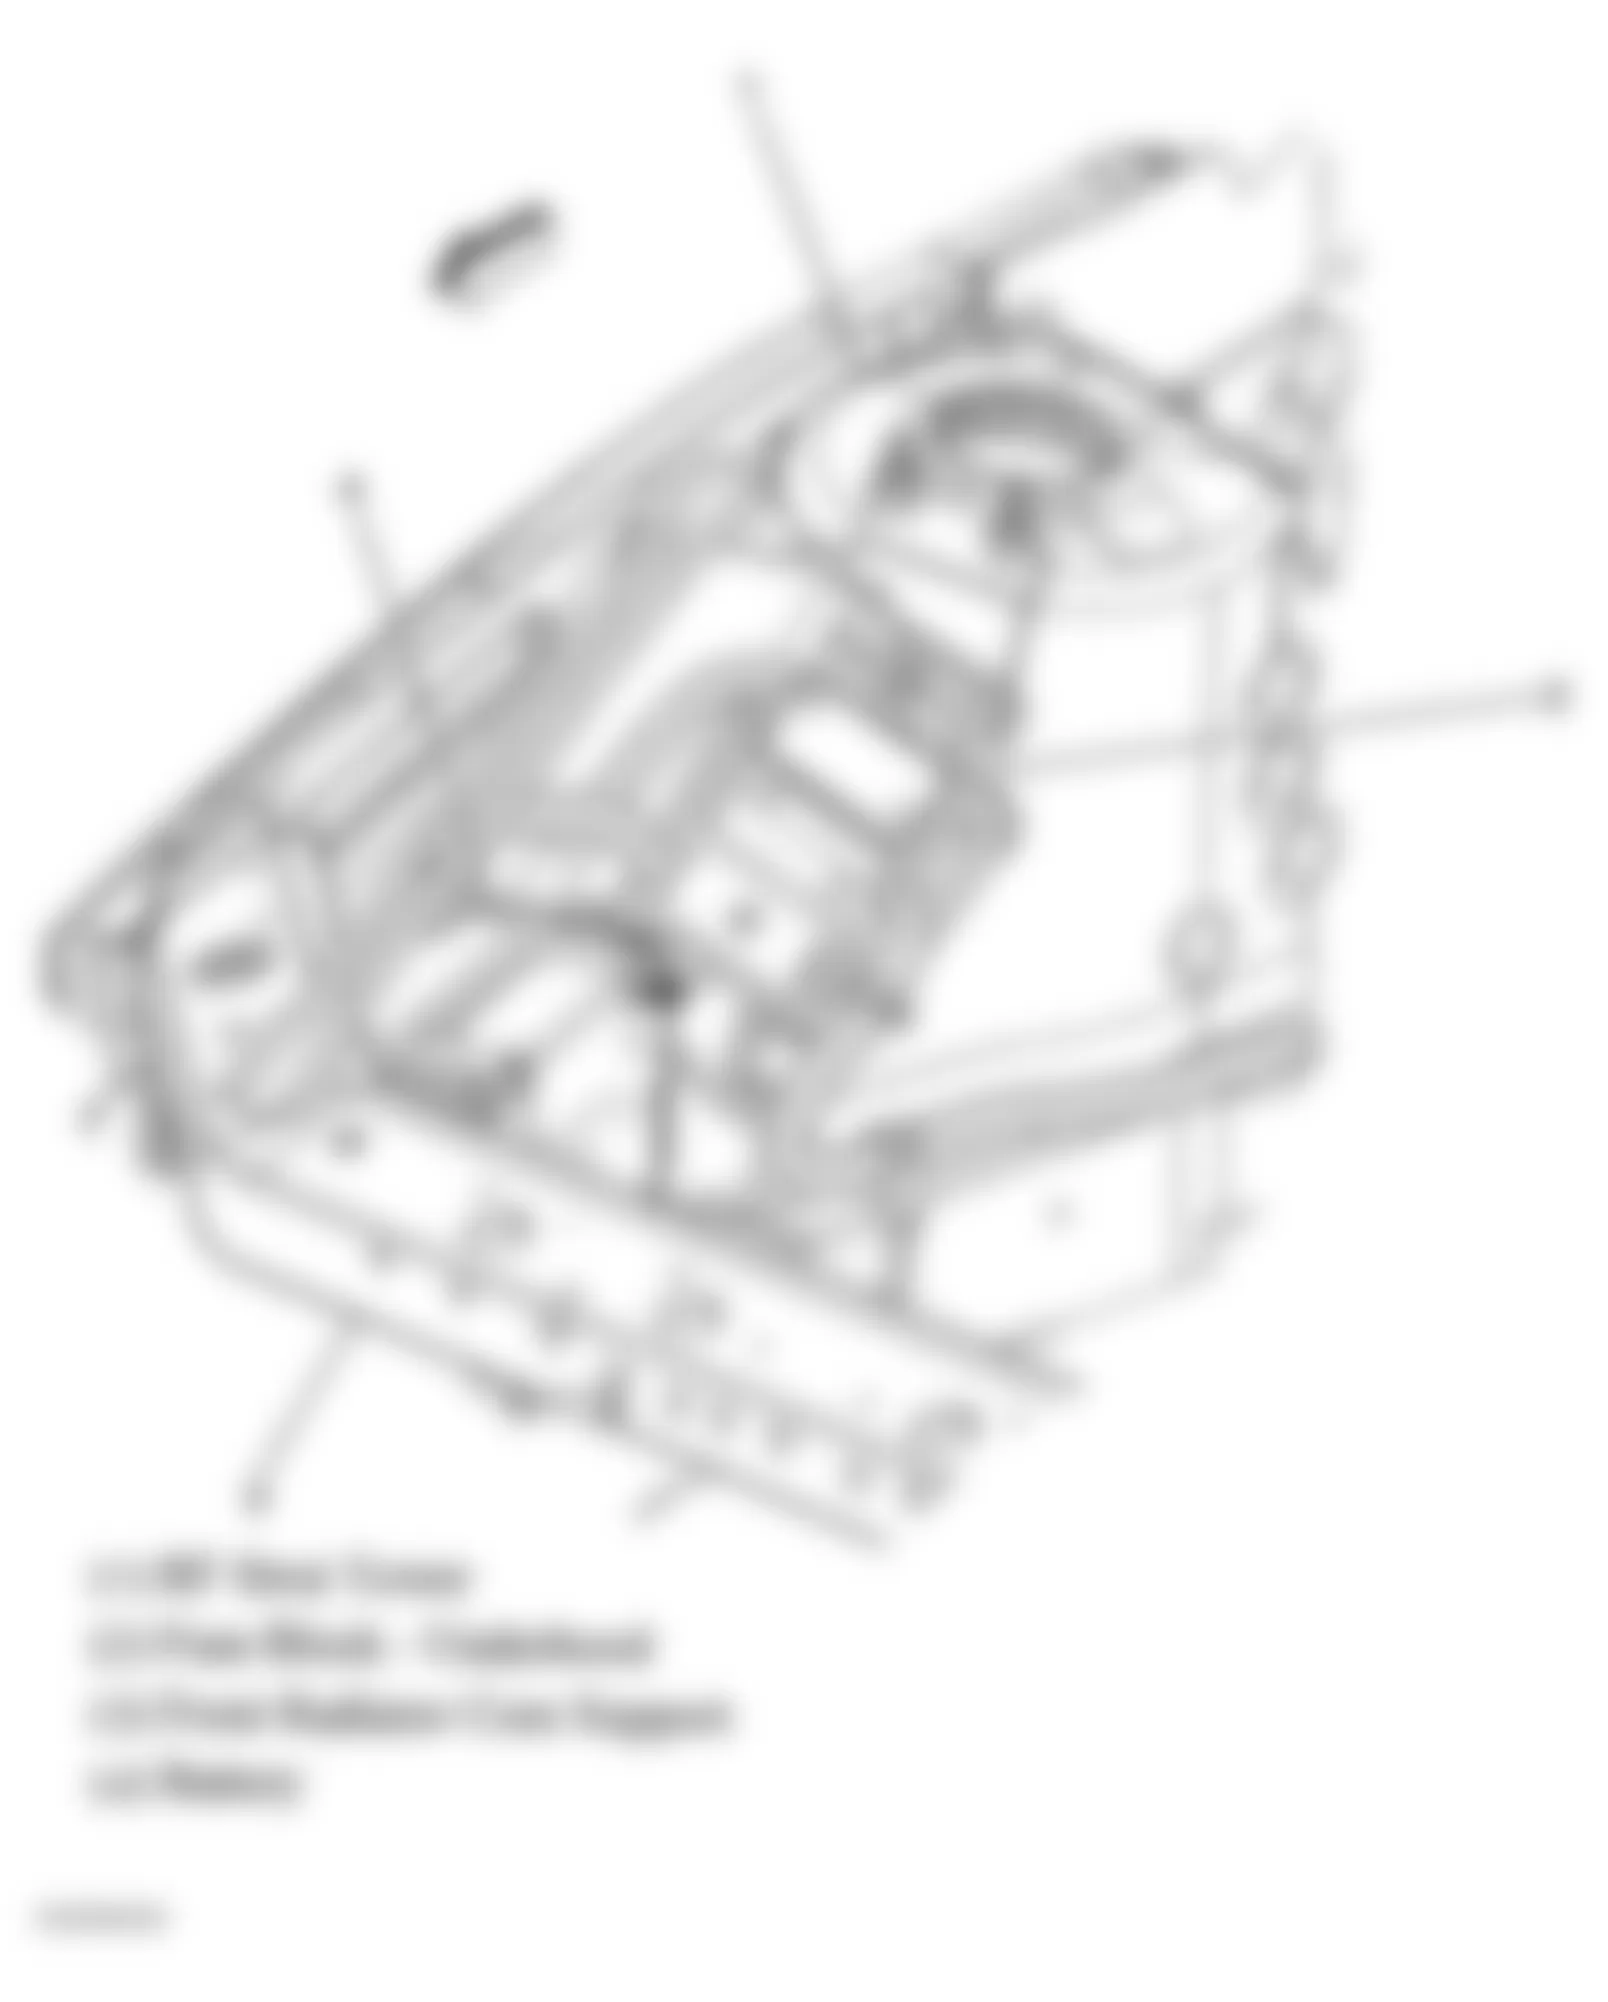 Buick Allure CXL 2006 - Component Locations -  Right Front Of Engine Compartment